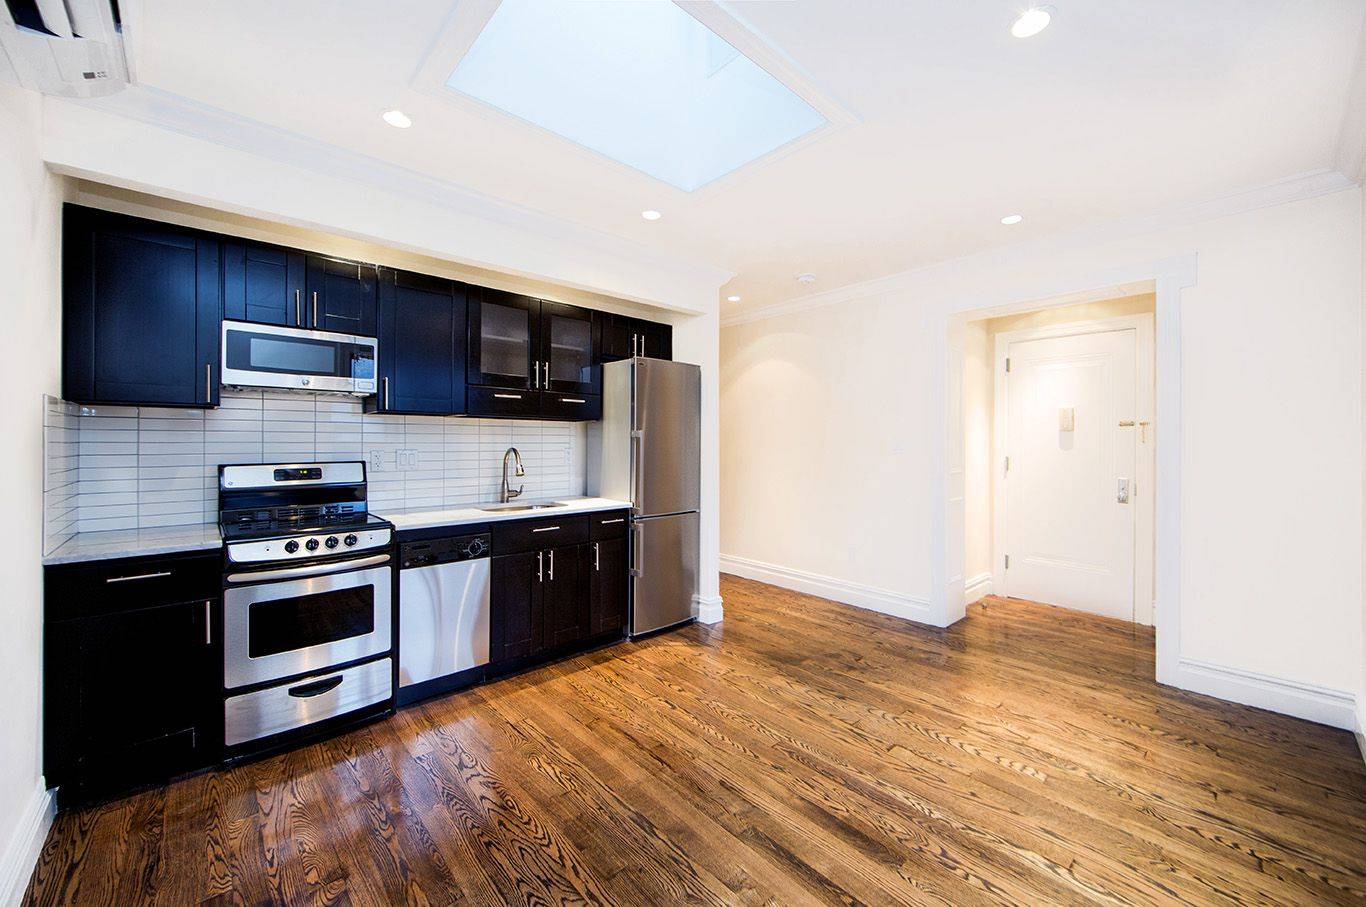 No Fee Gut Renovated Two Bedroom Apartment for Rent in West Village w/ Washer & Dryer